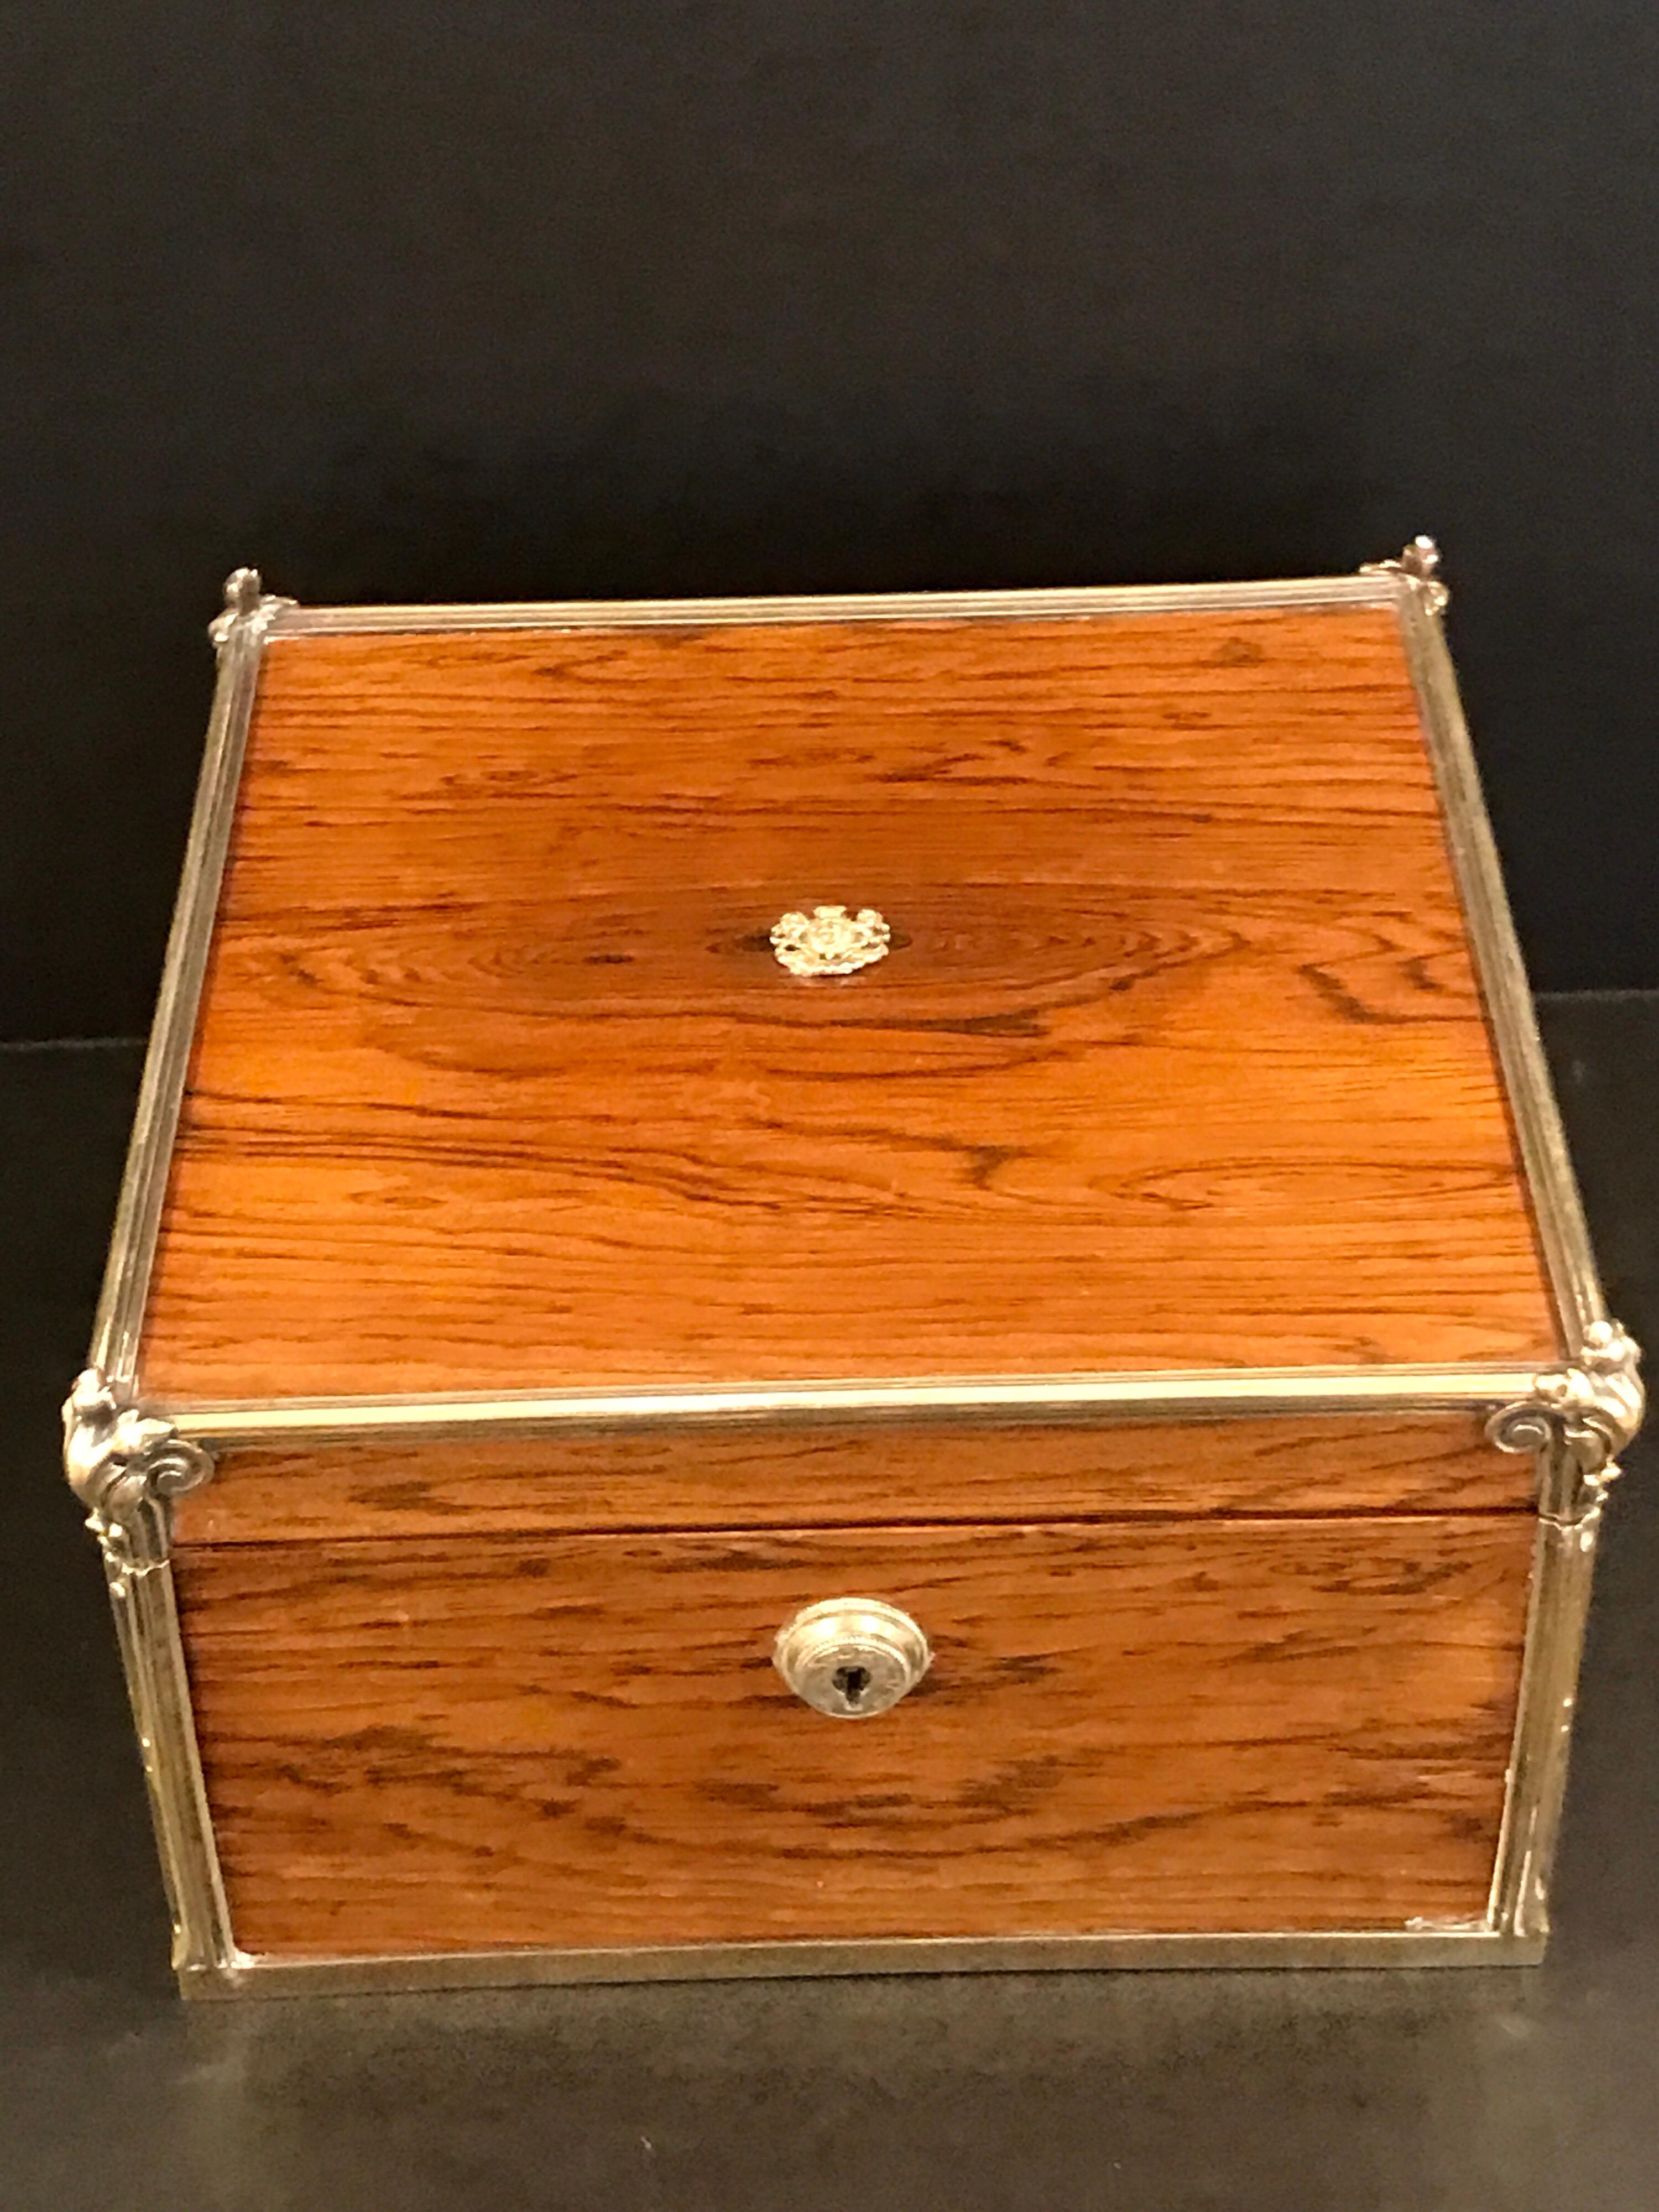 Royal Silver-Gilt Mounted Toilet Box by Paul Storr, London, 1813 For Sale 10